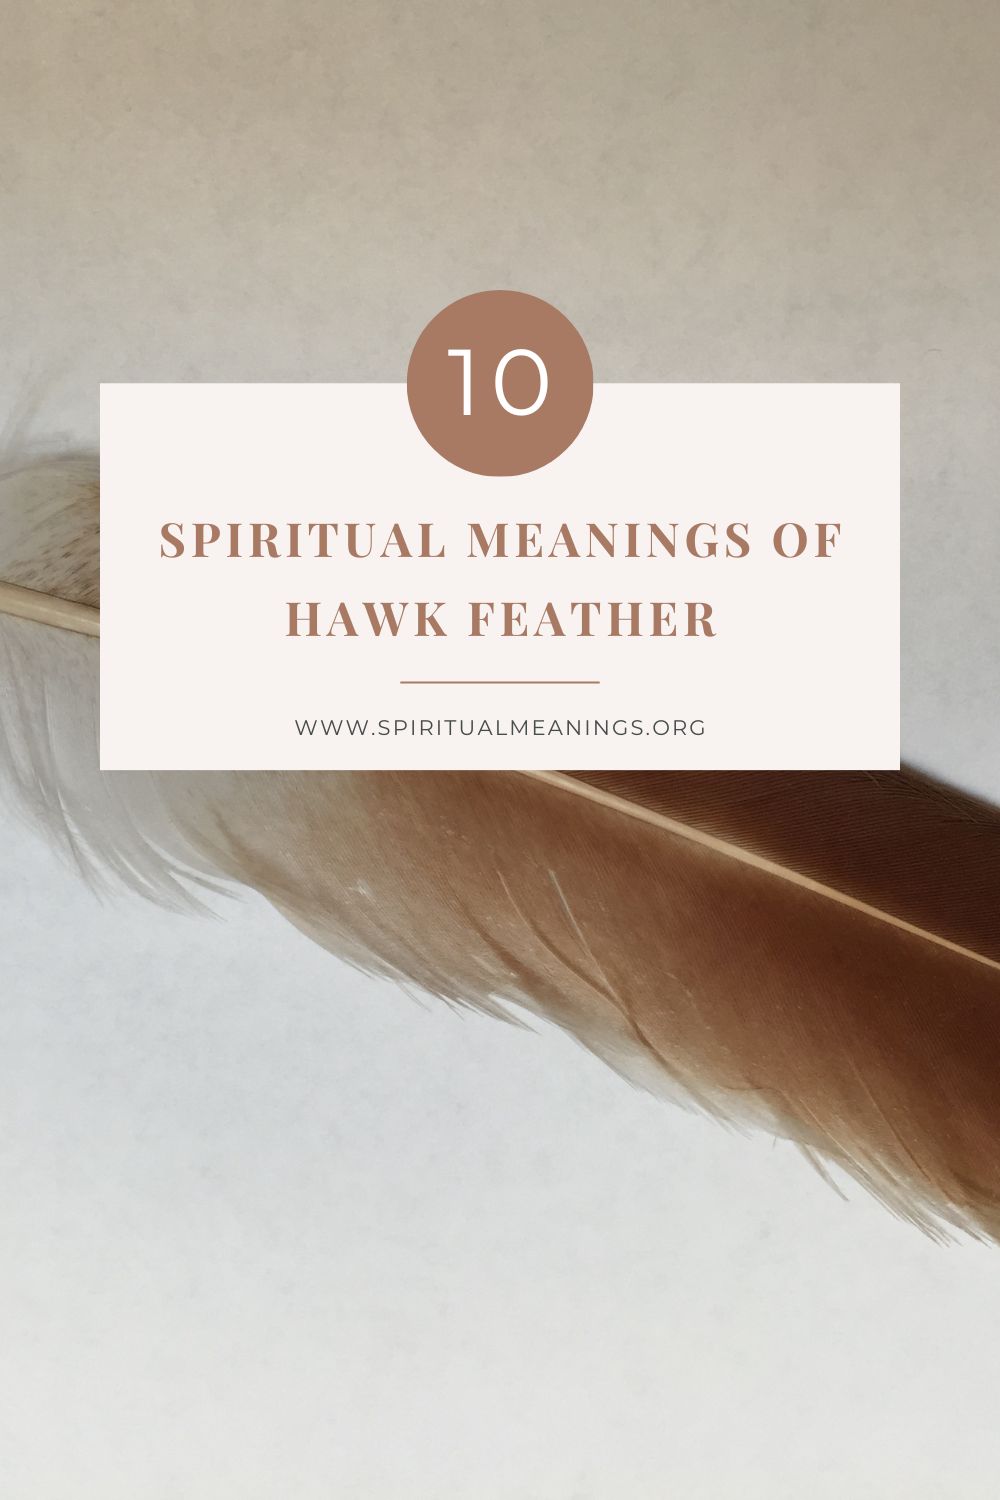 10 Spiritual Meanings of Hawk Feather